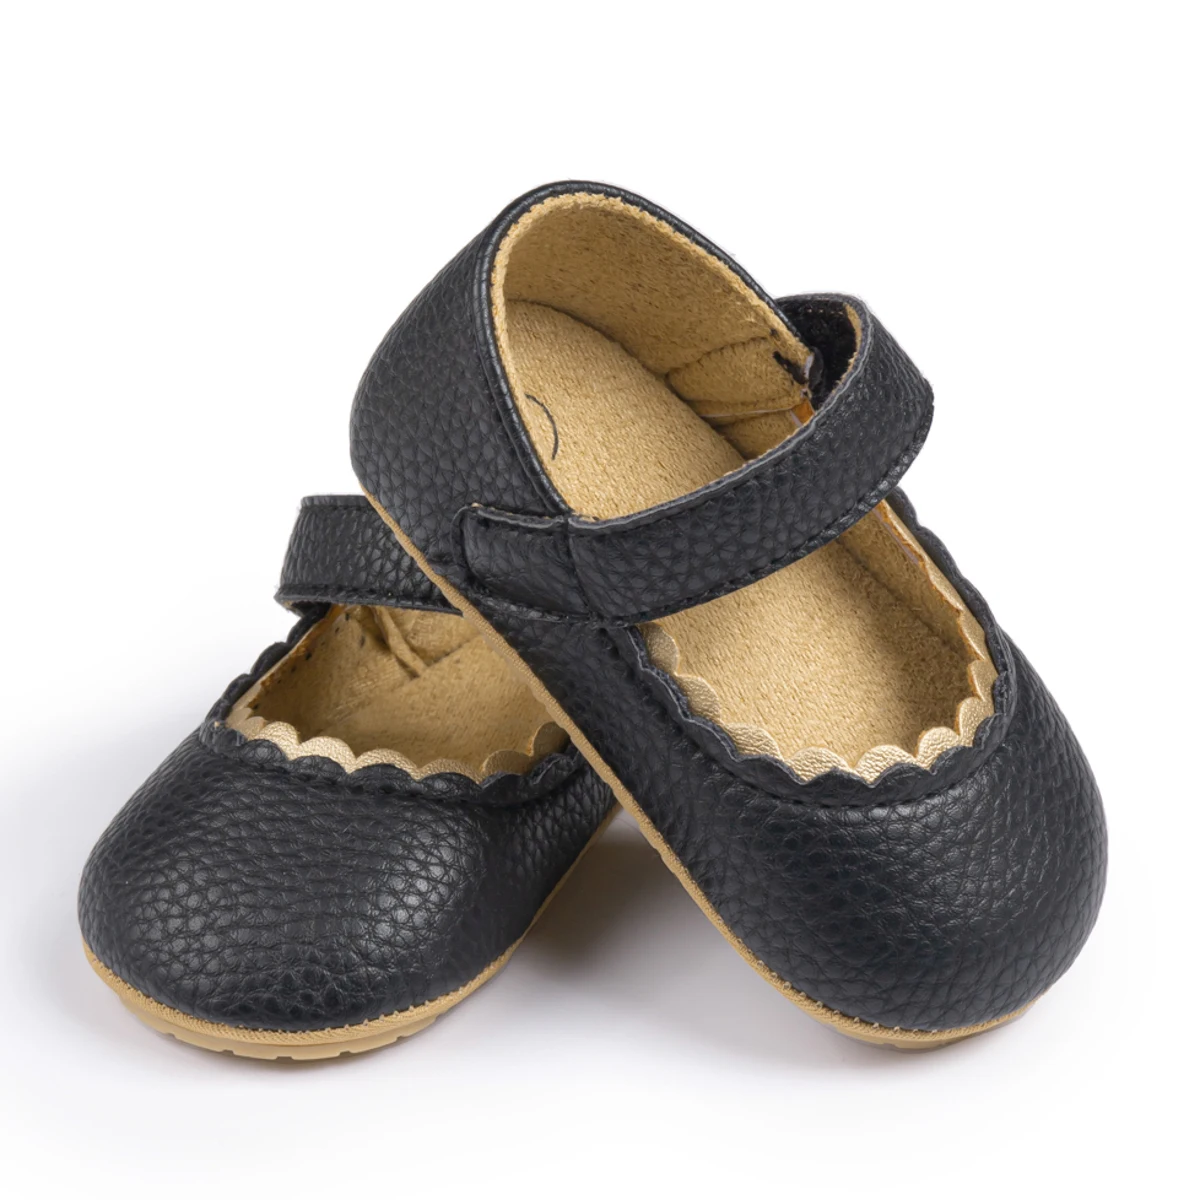 Wholesale Cheap Newborn Girls Shoes PU Leather Breathable Soft Sole Holiday Party Baby Dress Shoes for Princess Girls